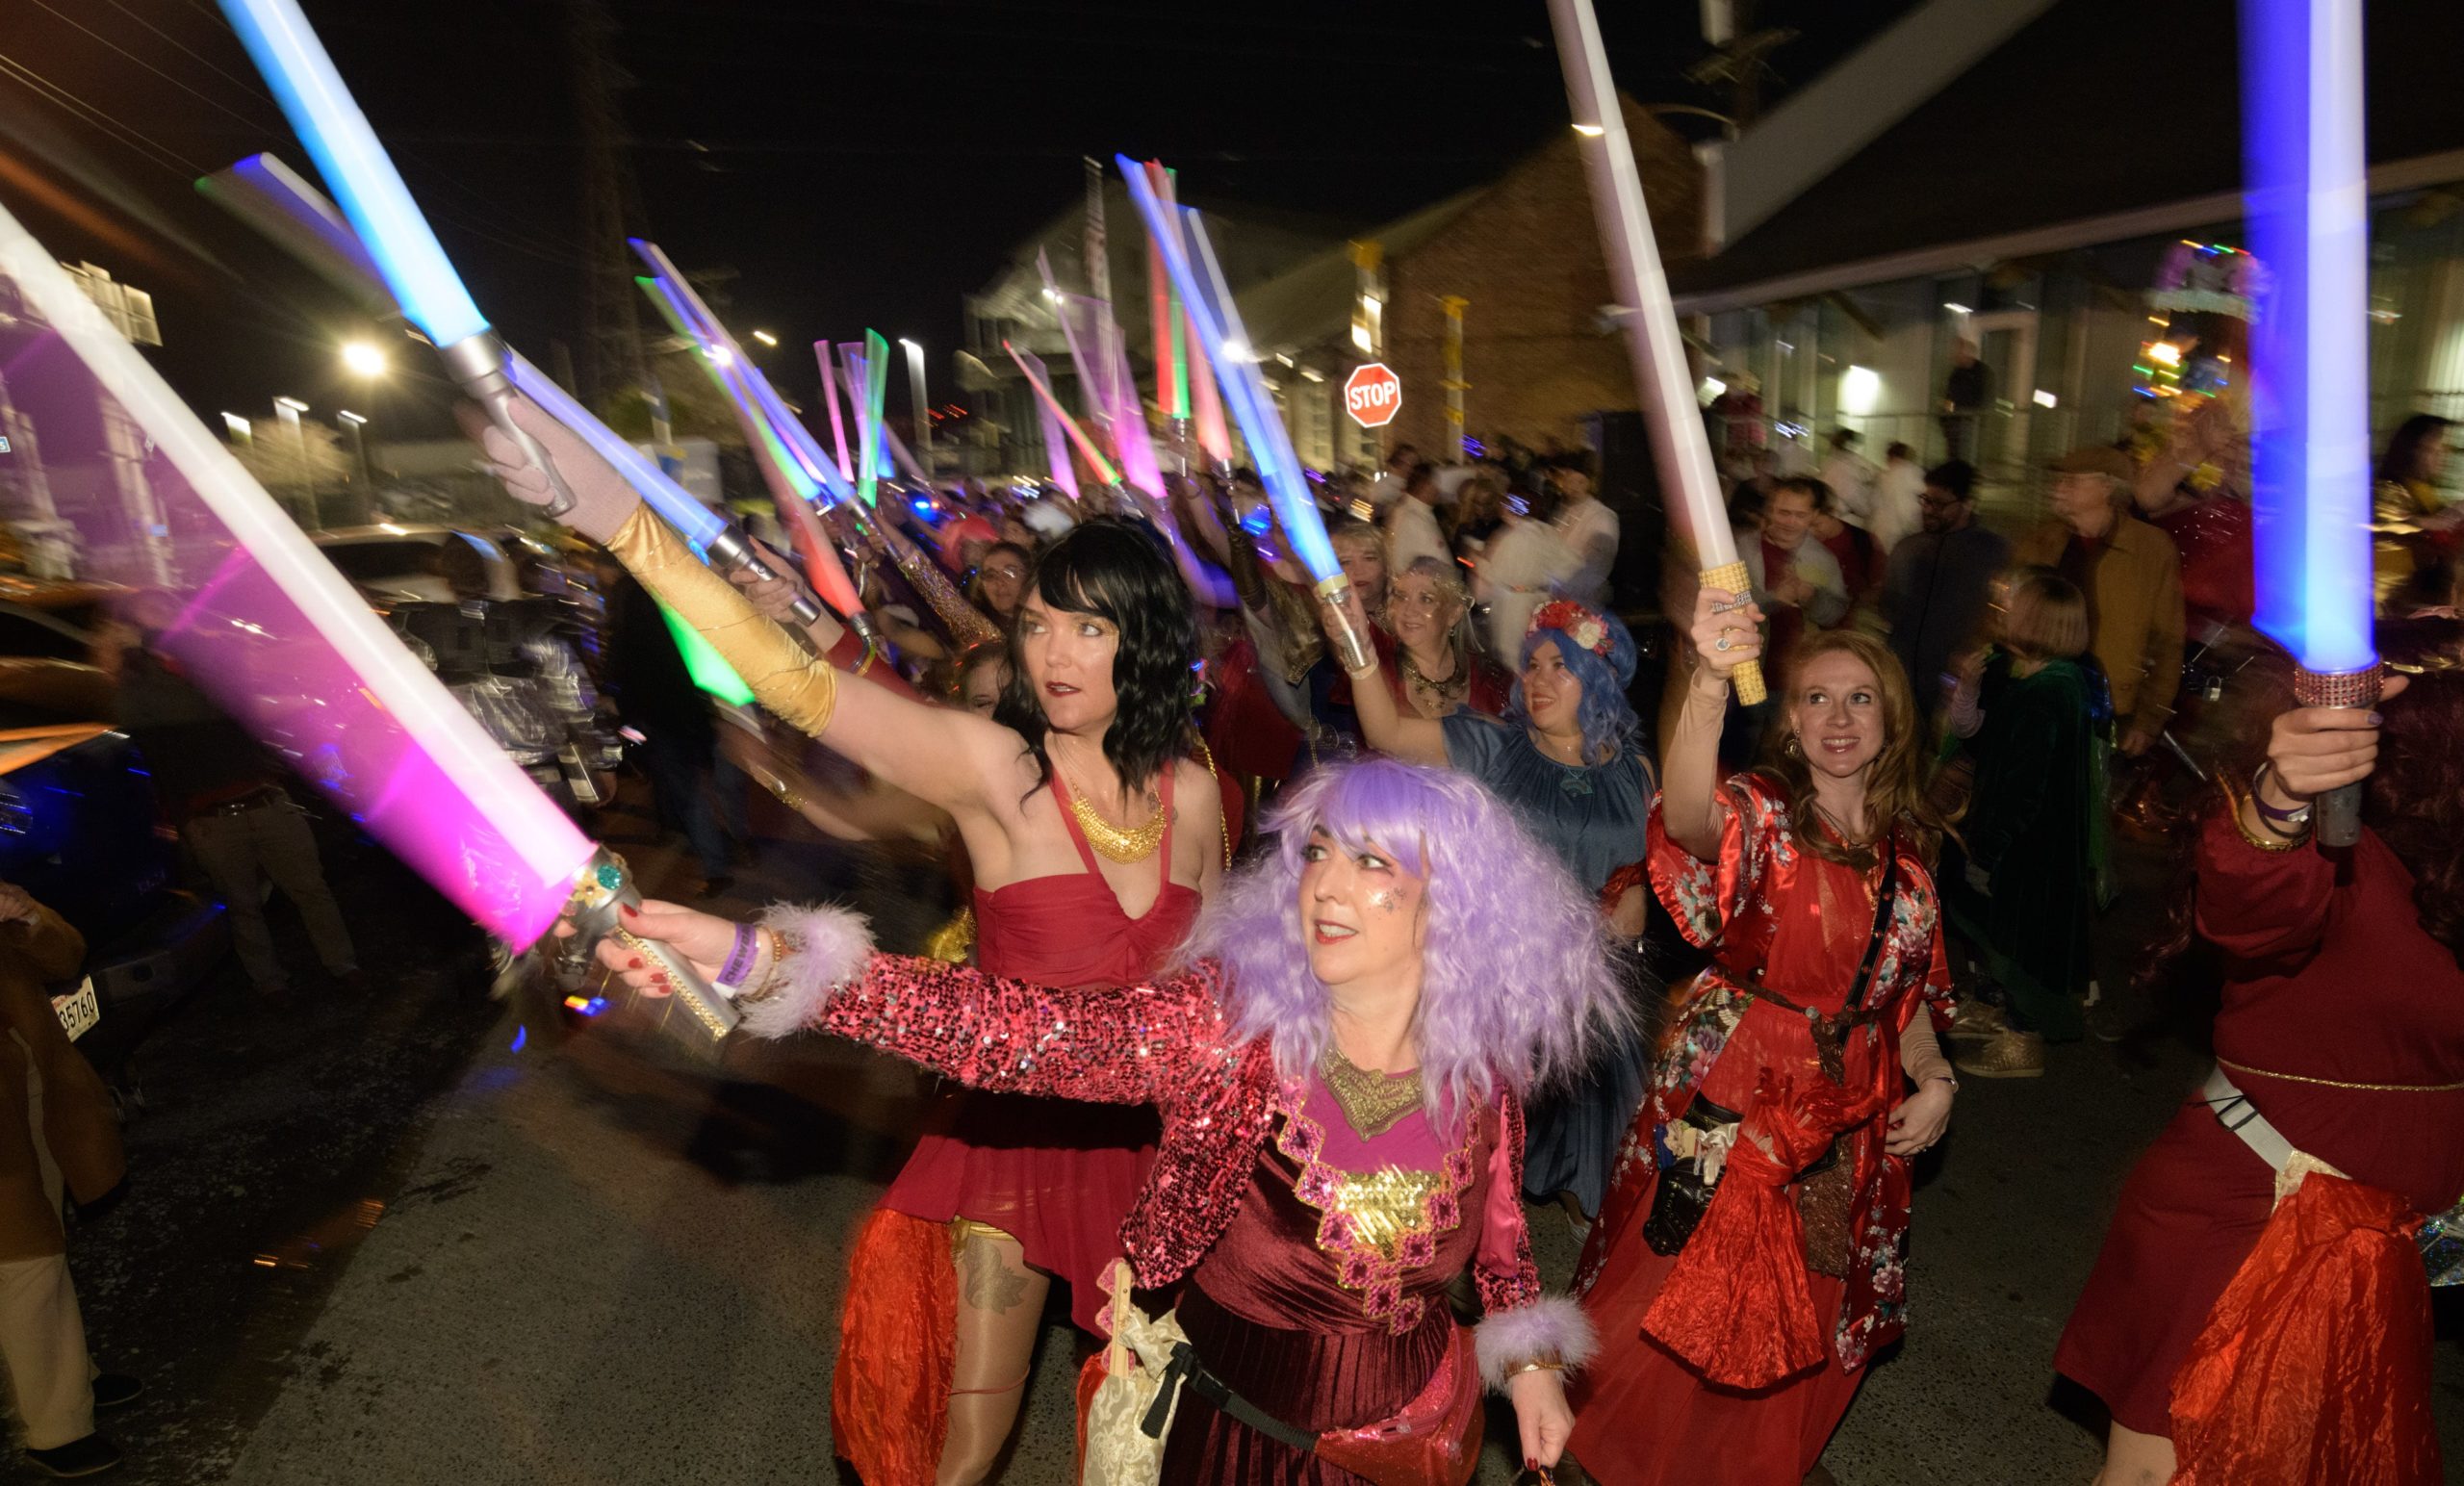 The Intergalactic Krewe of Chewbacchus jumped to lightspeed for the tenth time on Saturday Feb. 1, 2020 in New Orleans.  The Krewe also honored Peter Mayhew who played Chewbacca in the Star Wars trilogy and passed on April 30, 2019. Mayhew paraded with the Krewe as Emperor for Life in 2013 and 2015.  The parade is the first major parade to kick off the Carnival season that ends on Mardi Gras Feb. 25, 2020. The Krewe, filled with passionate and devoted nerds of science-fiction and fantasy, marched with the theme of “The Roar of the Wookiee.” The Krewe has a new route this year stretching from the Bywater to the French Quarter. Photo by Matthew Hinton